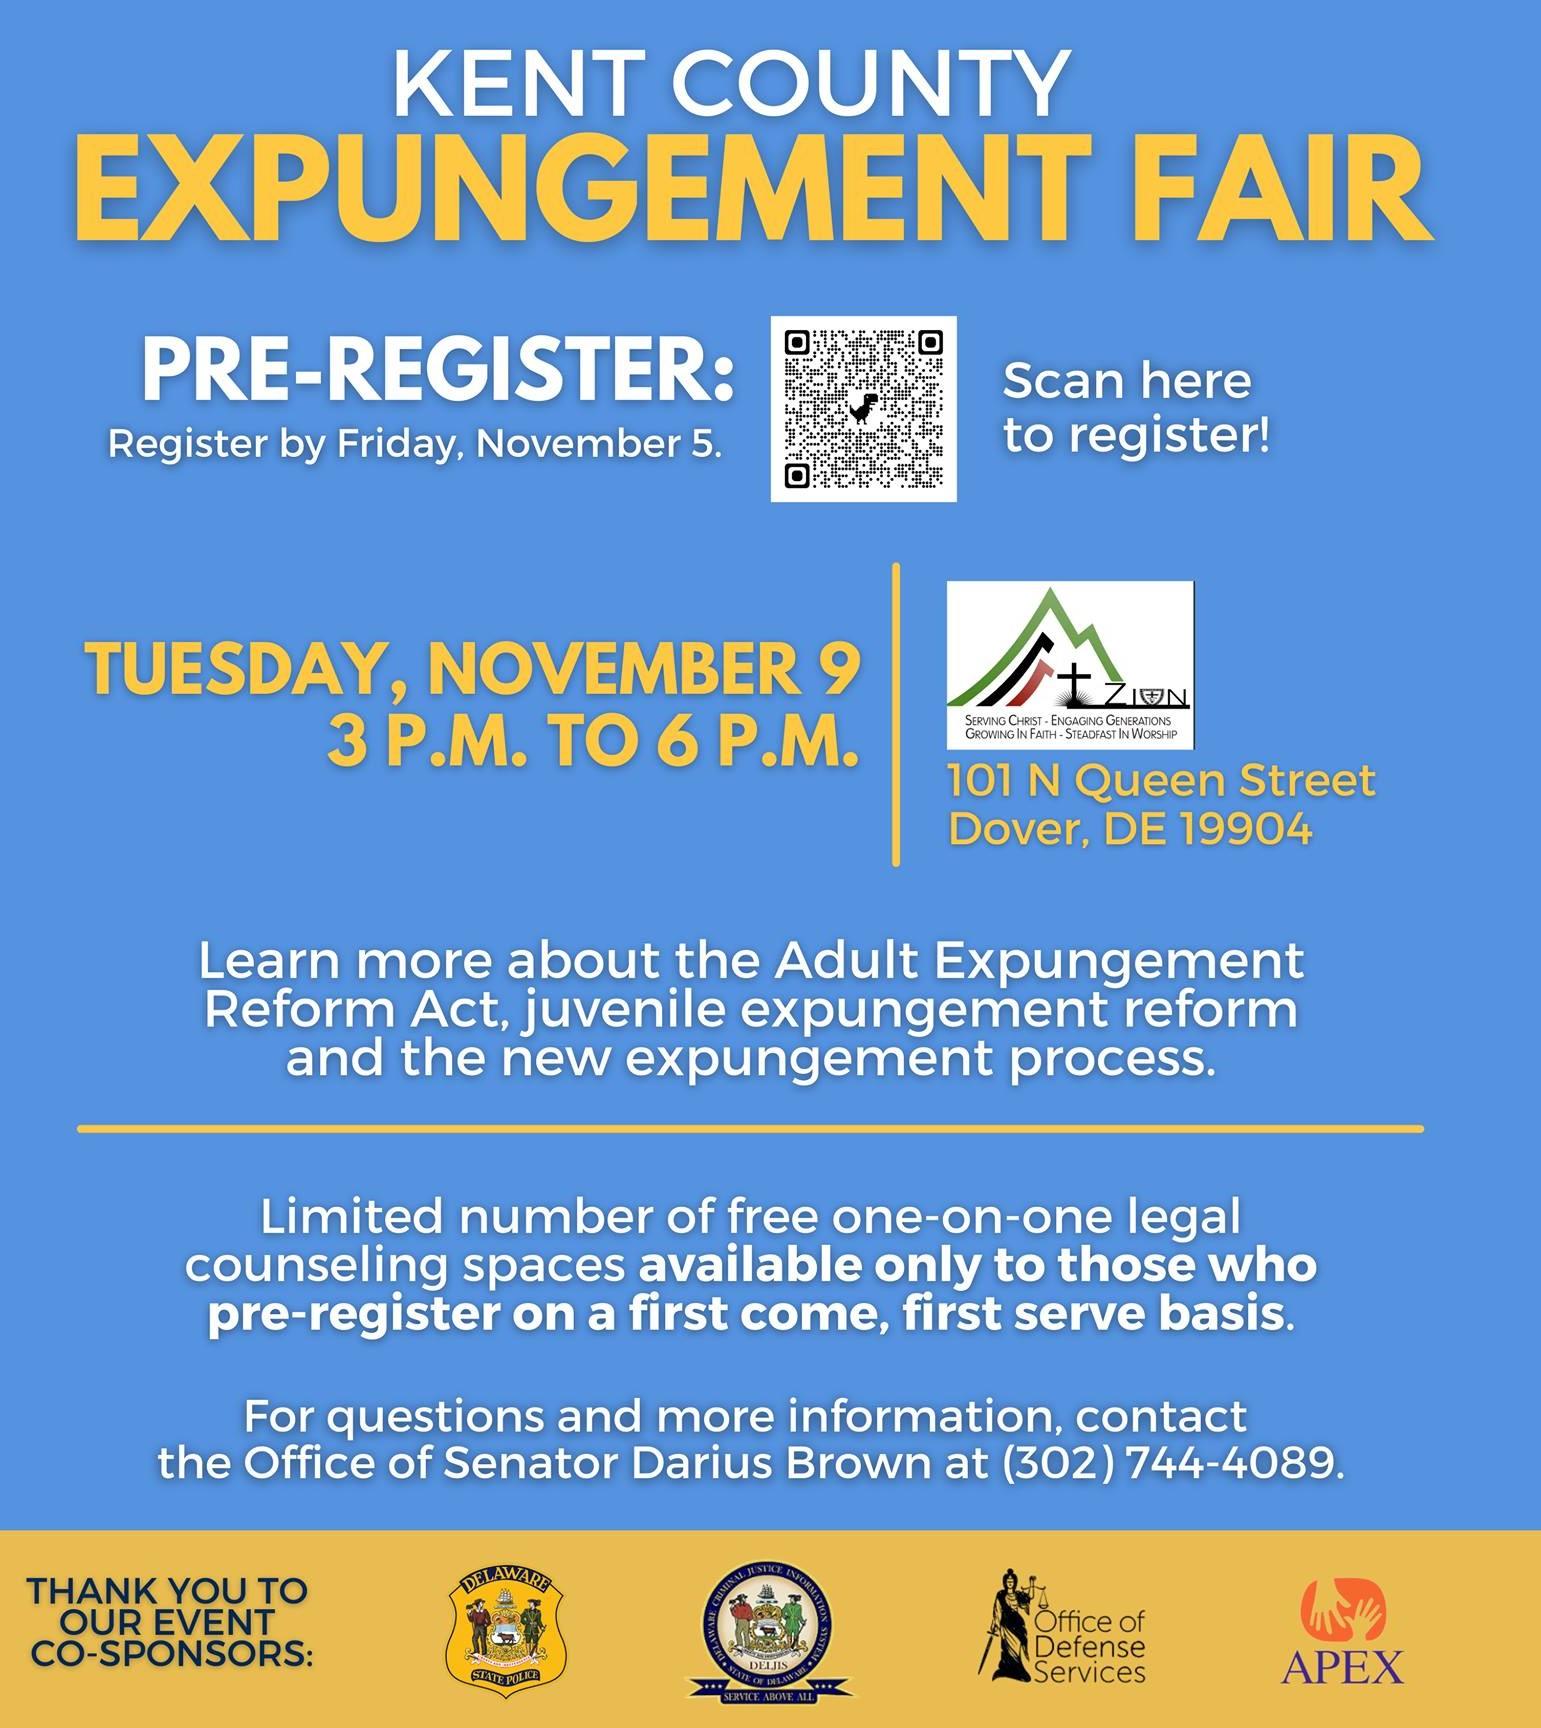 Kent County Expungement Fair